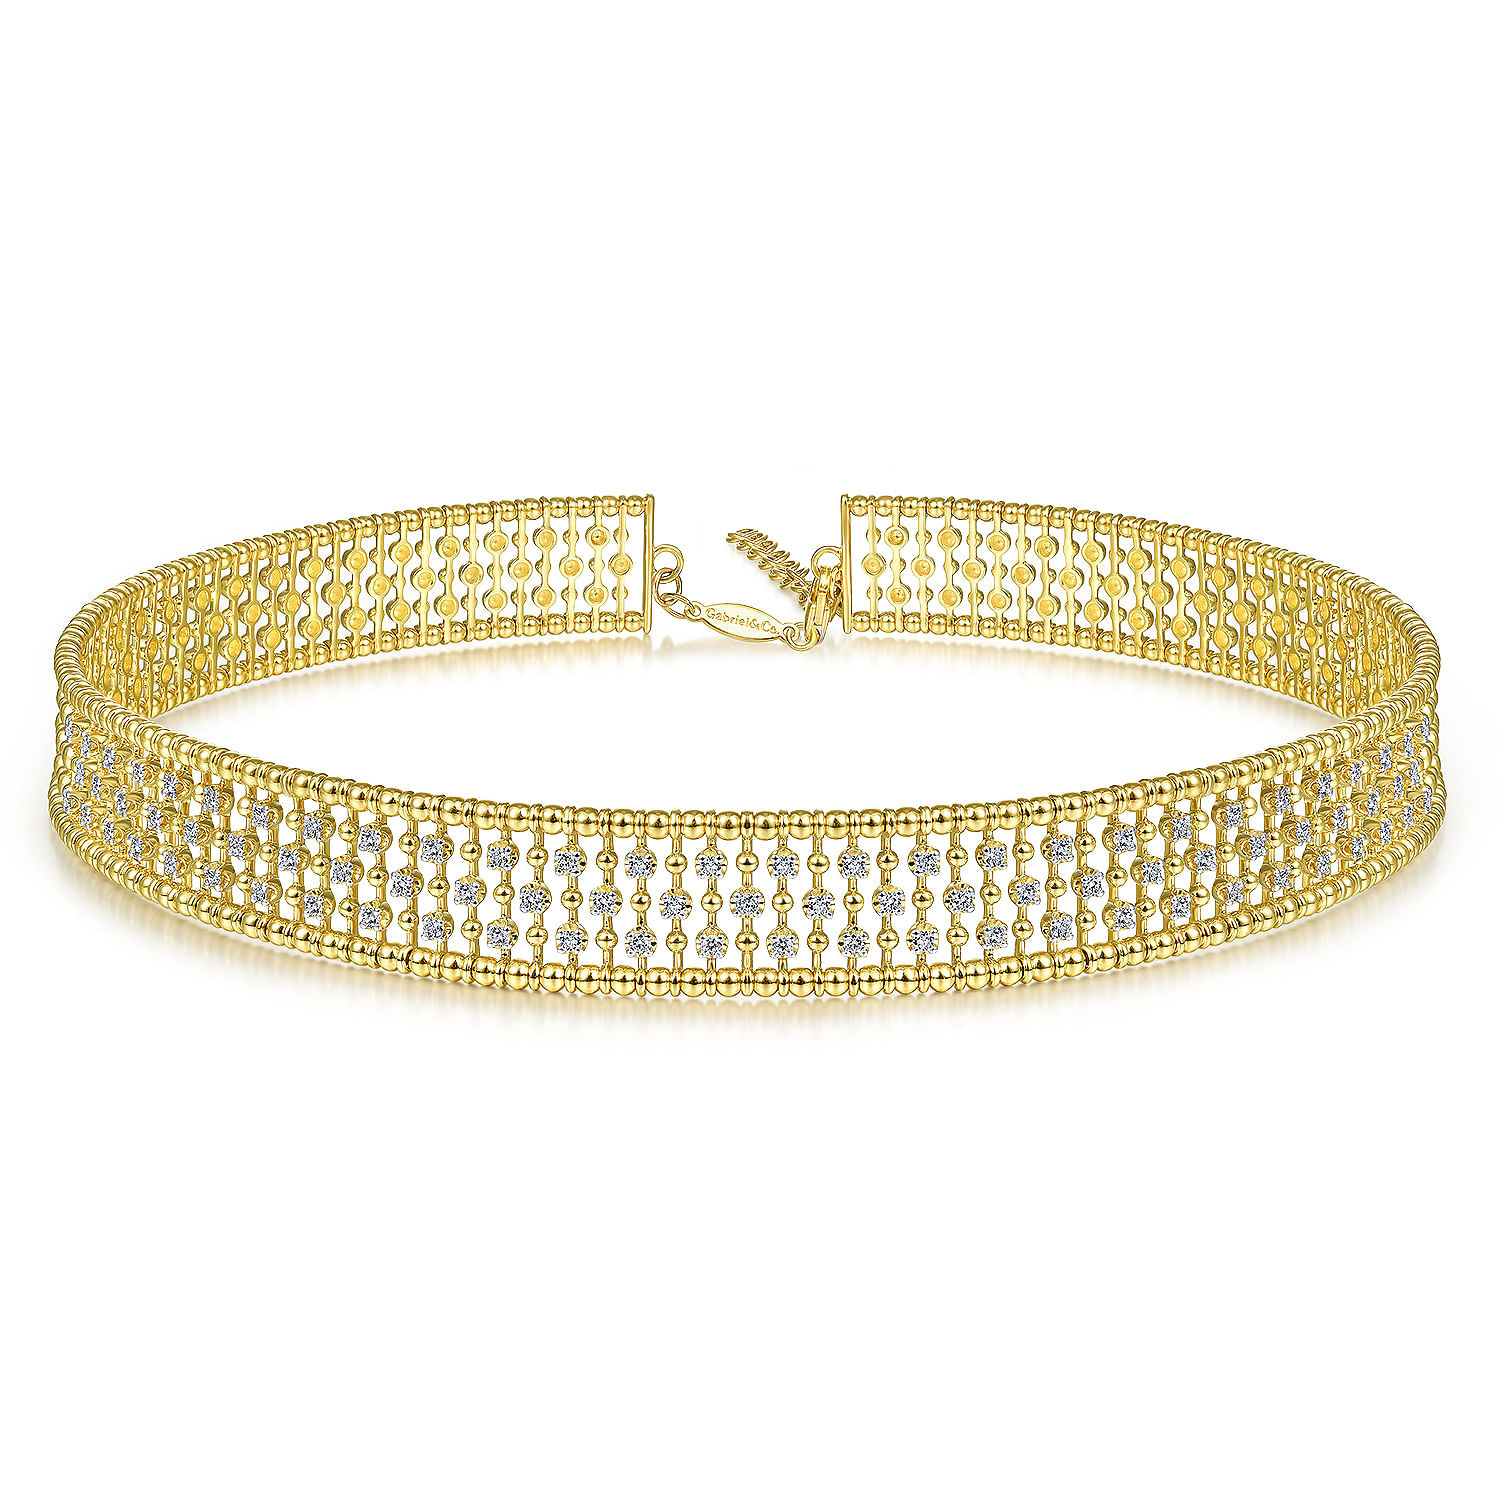 14K Yellow Gold Wide Diamond Station Choker Necklace with Bujukan Beads, 13.5+2 inch